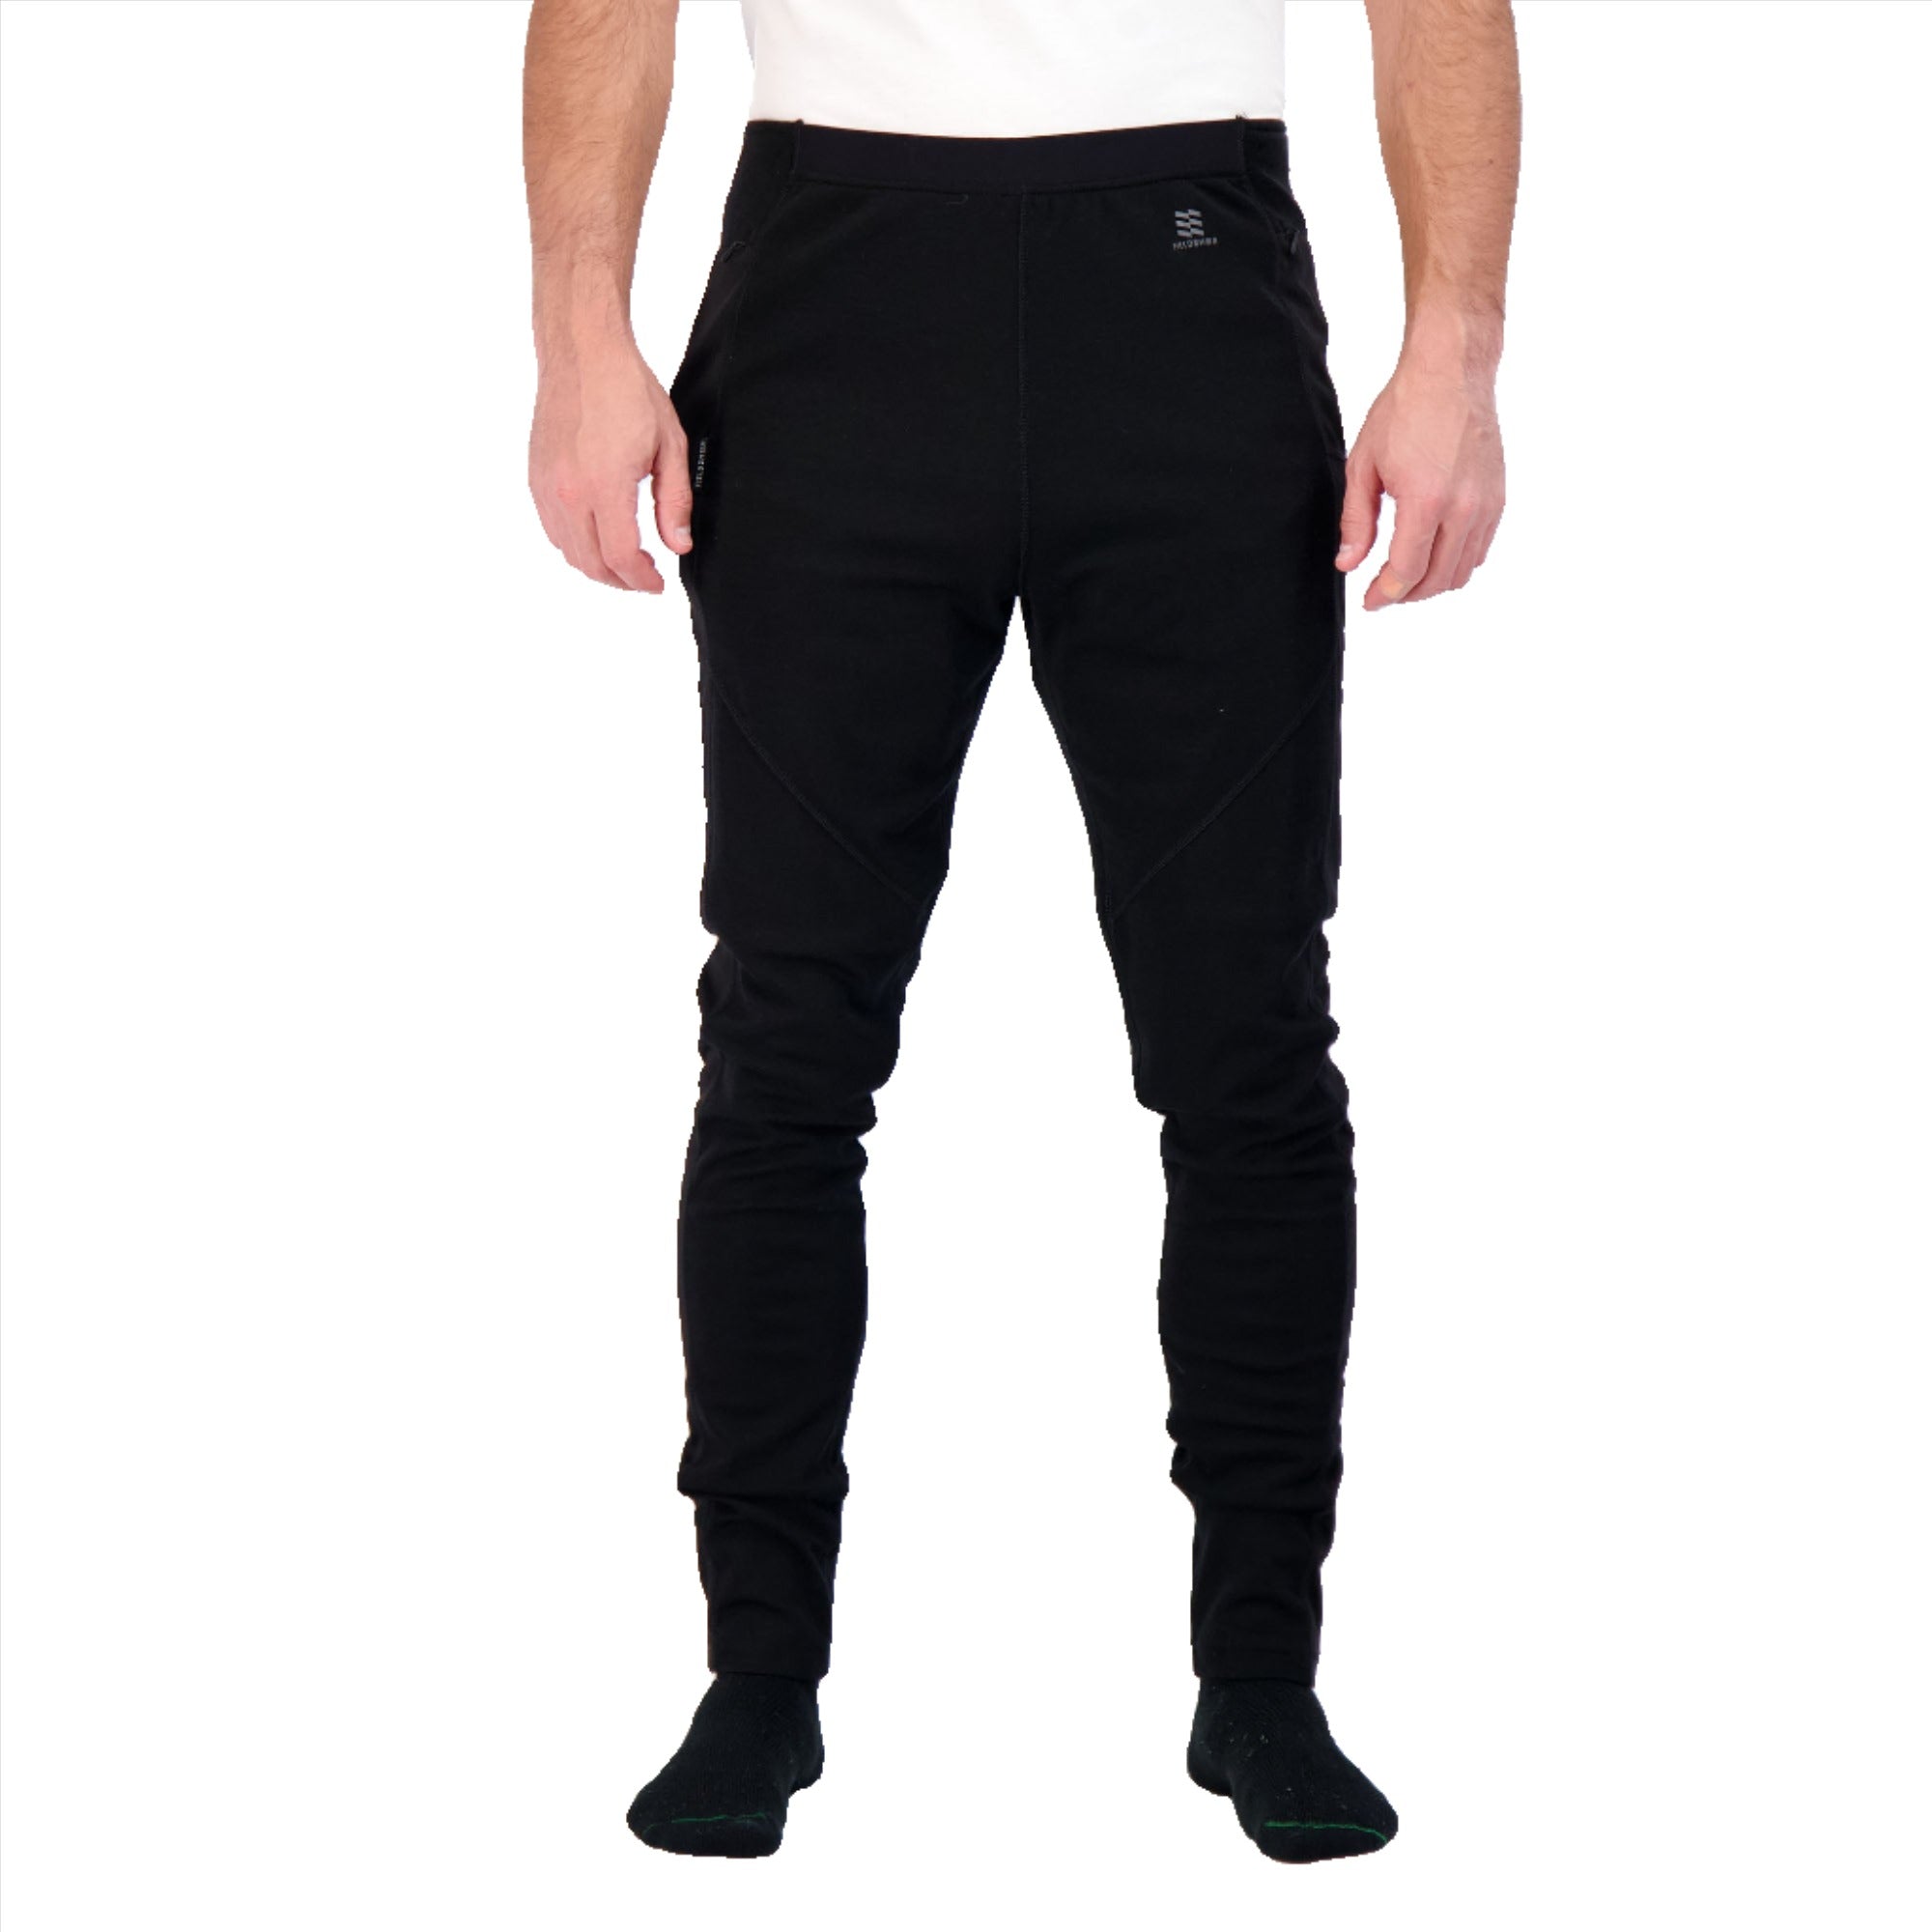 Men's Thermal Heavyweight Windproof Pants | Athletic Outer Layer Pants |  Double Layered